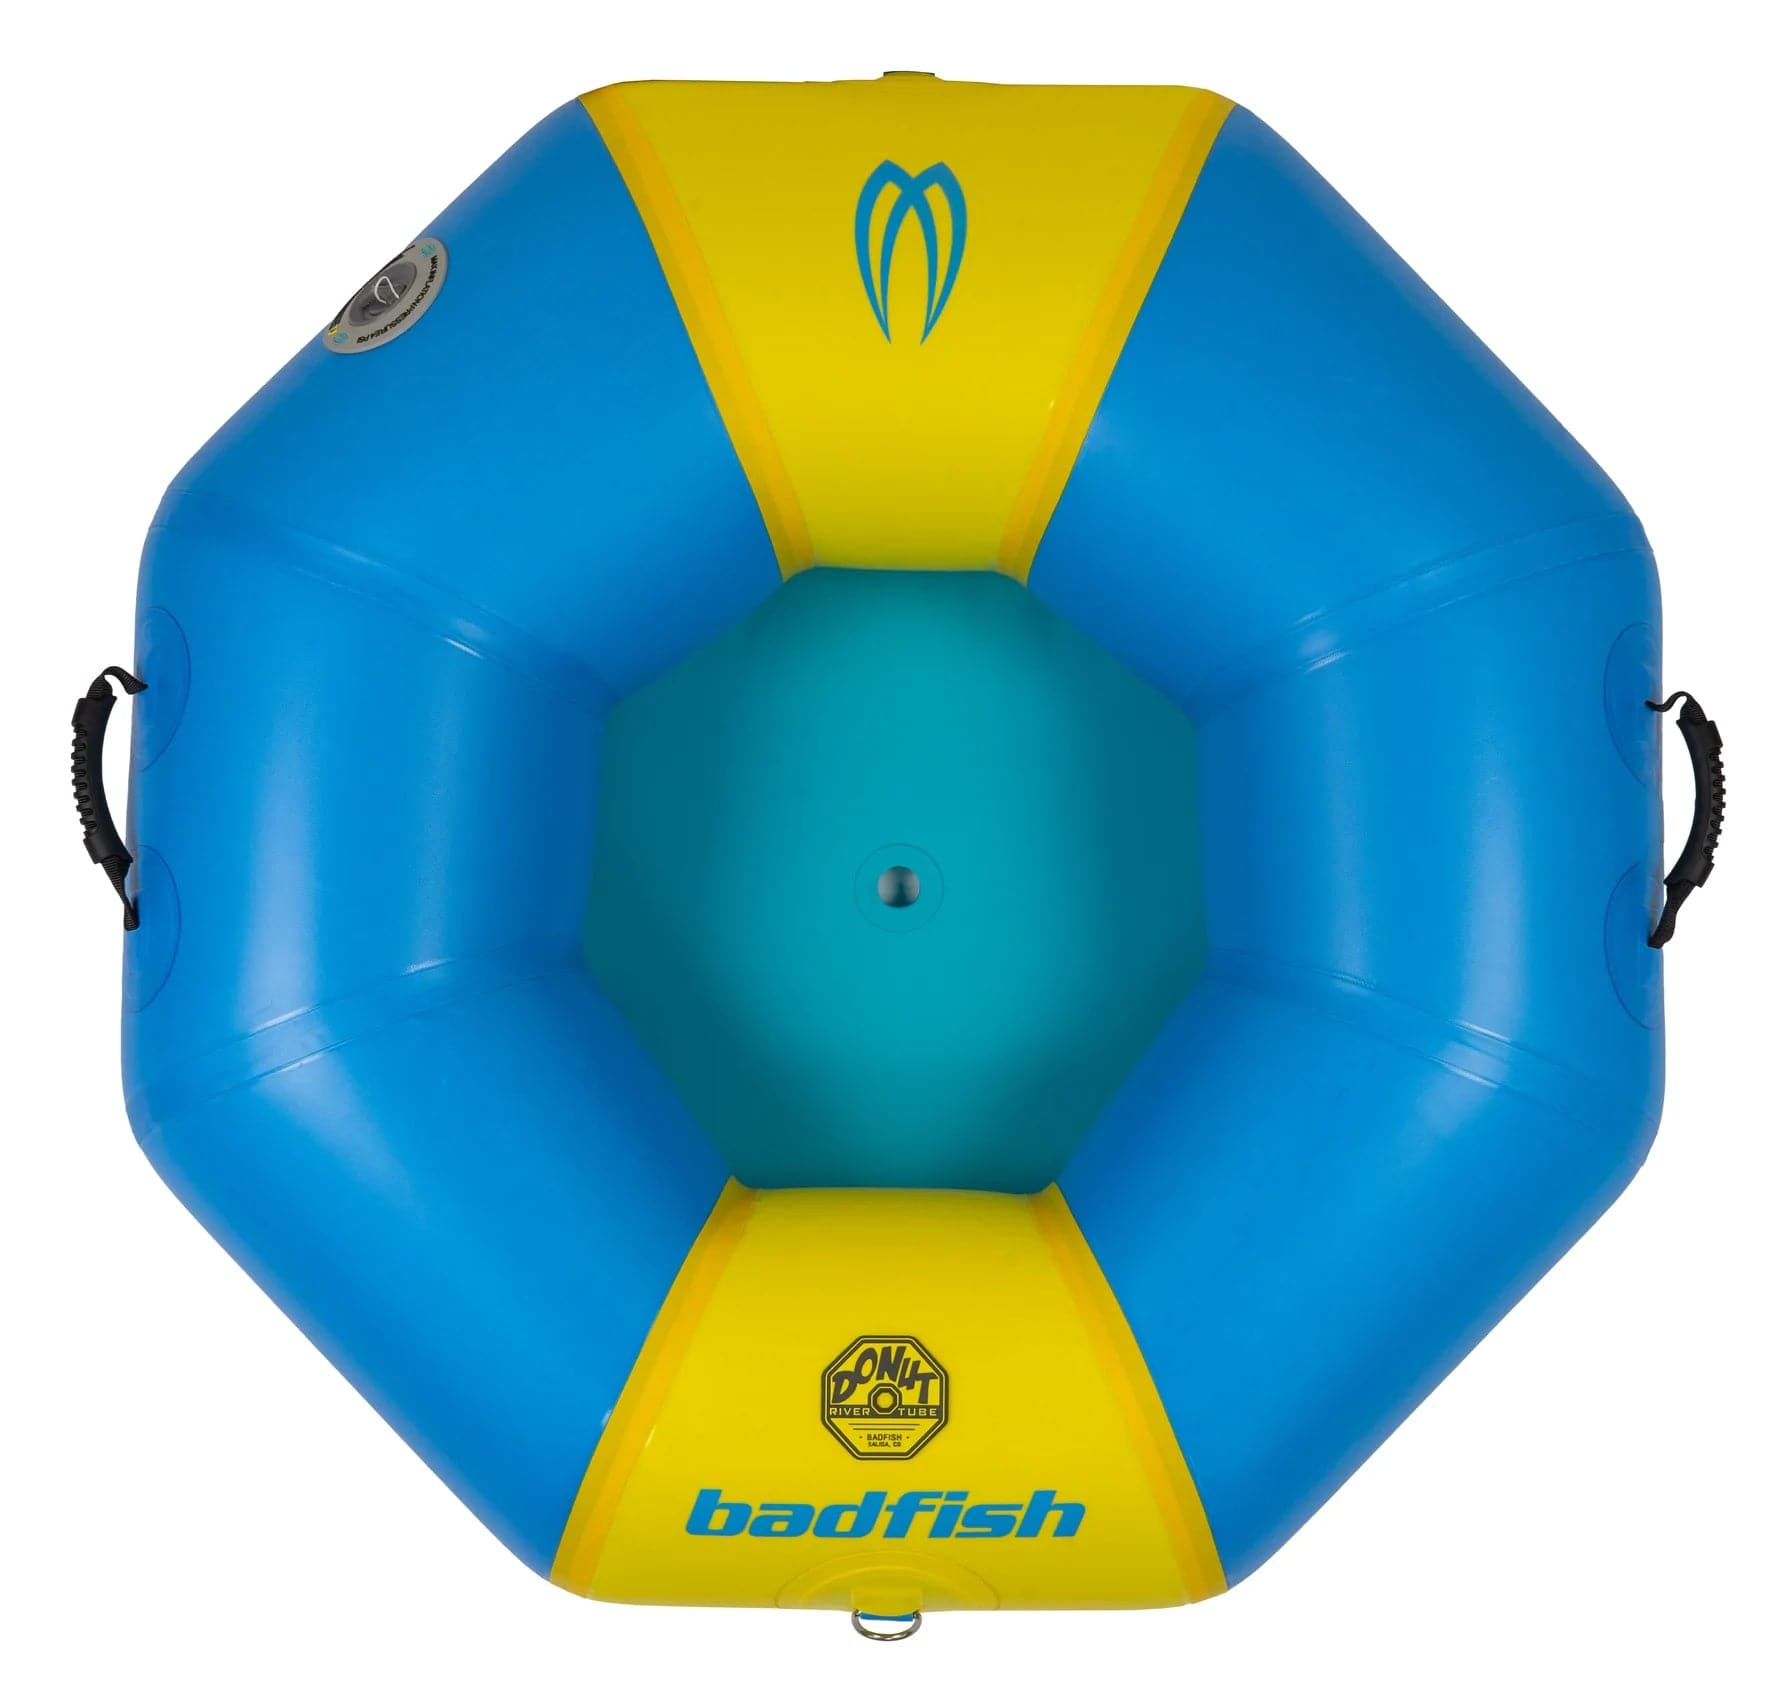 Featuring the Donut River Tube river tube manufactured by Badfish shown here from one angle.